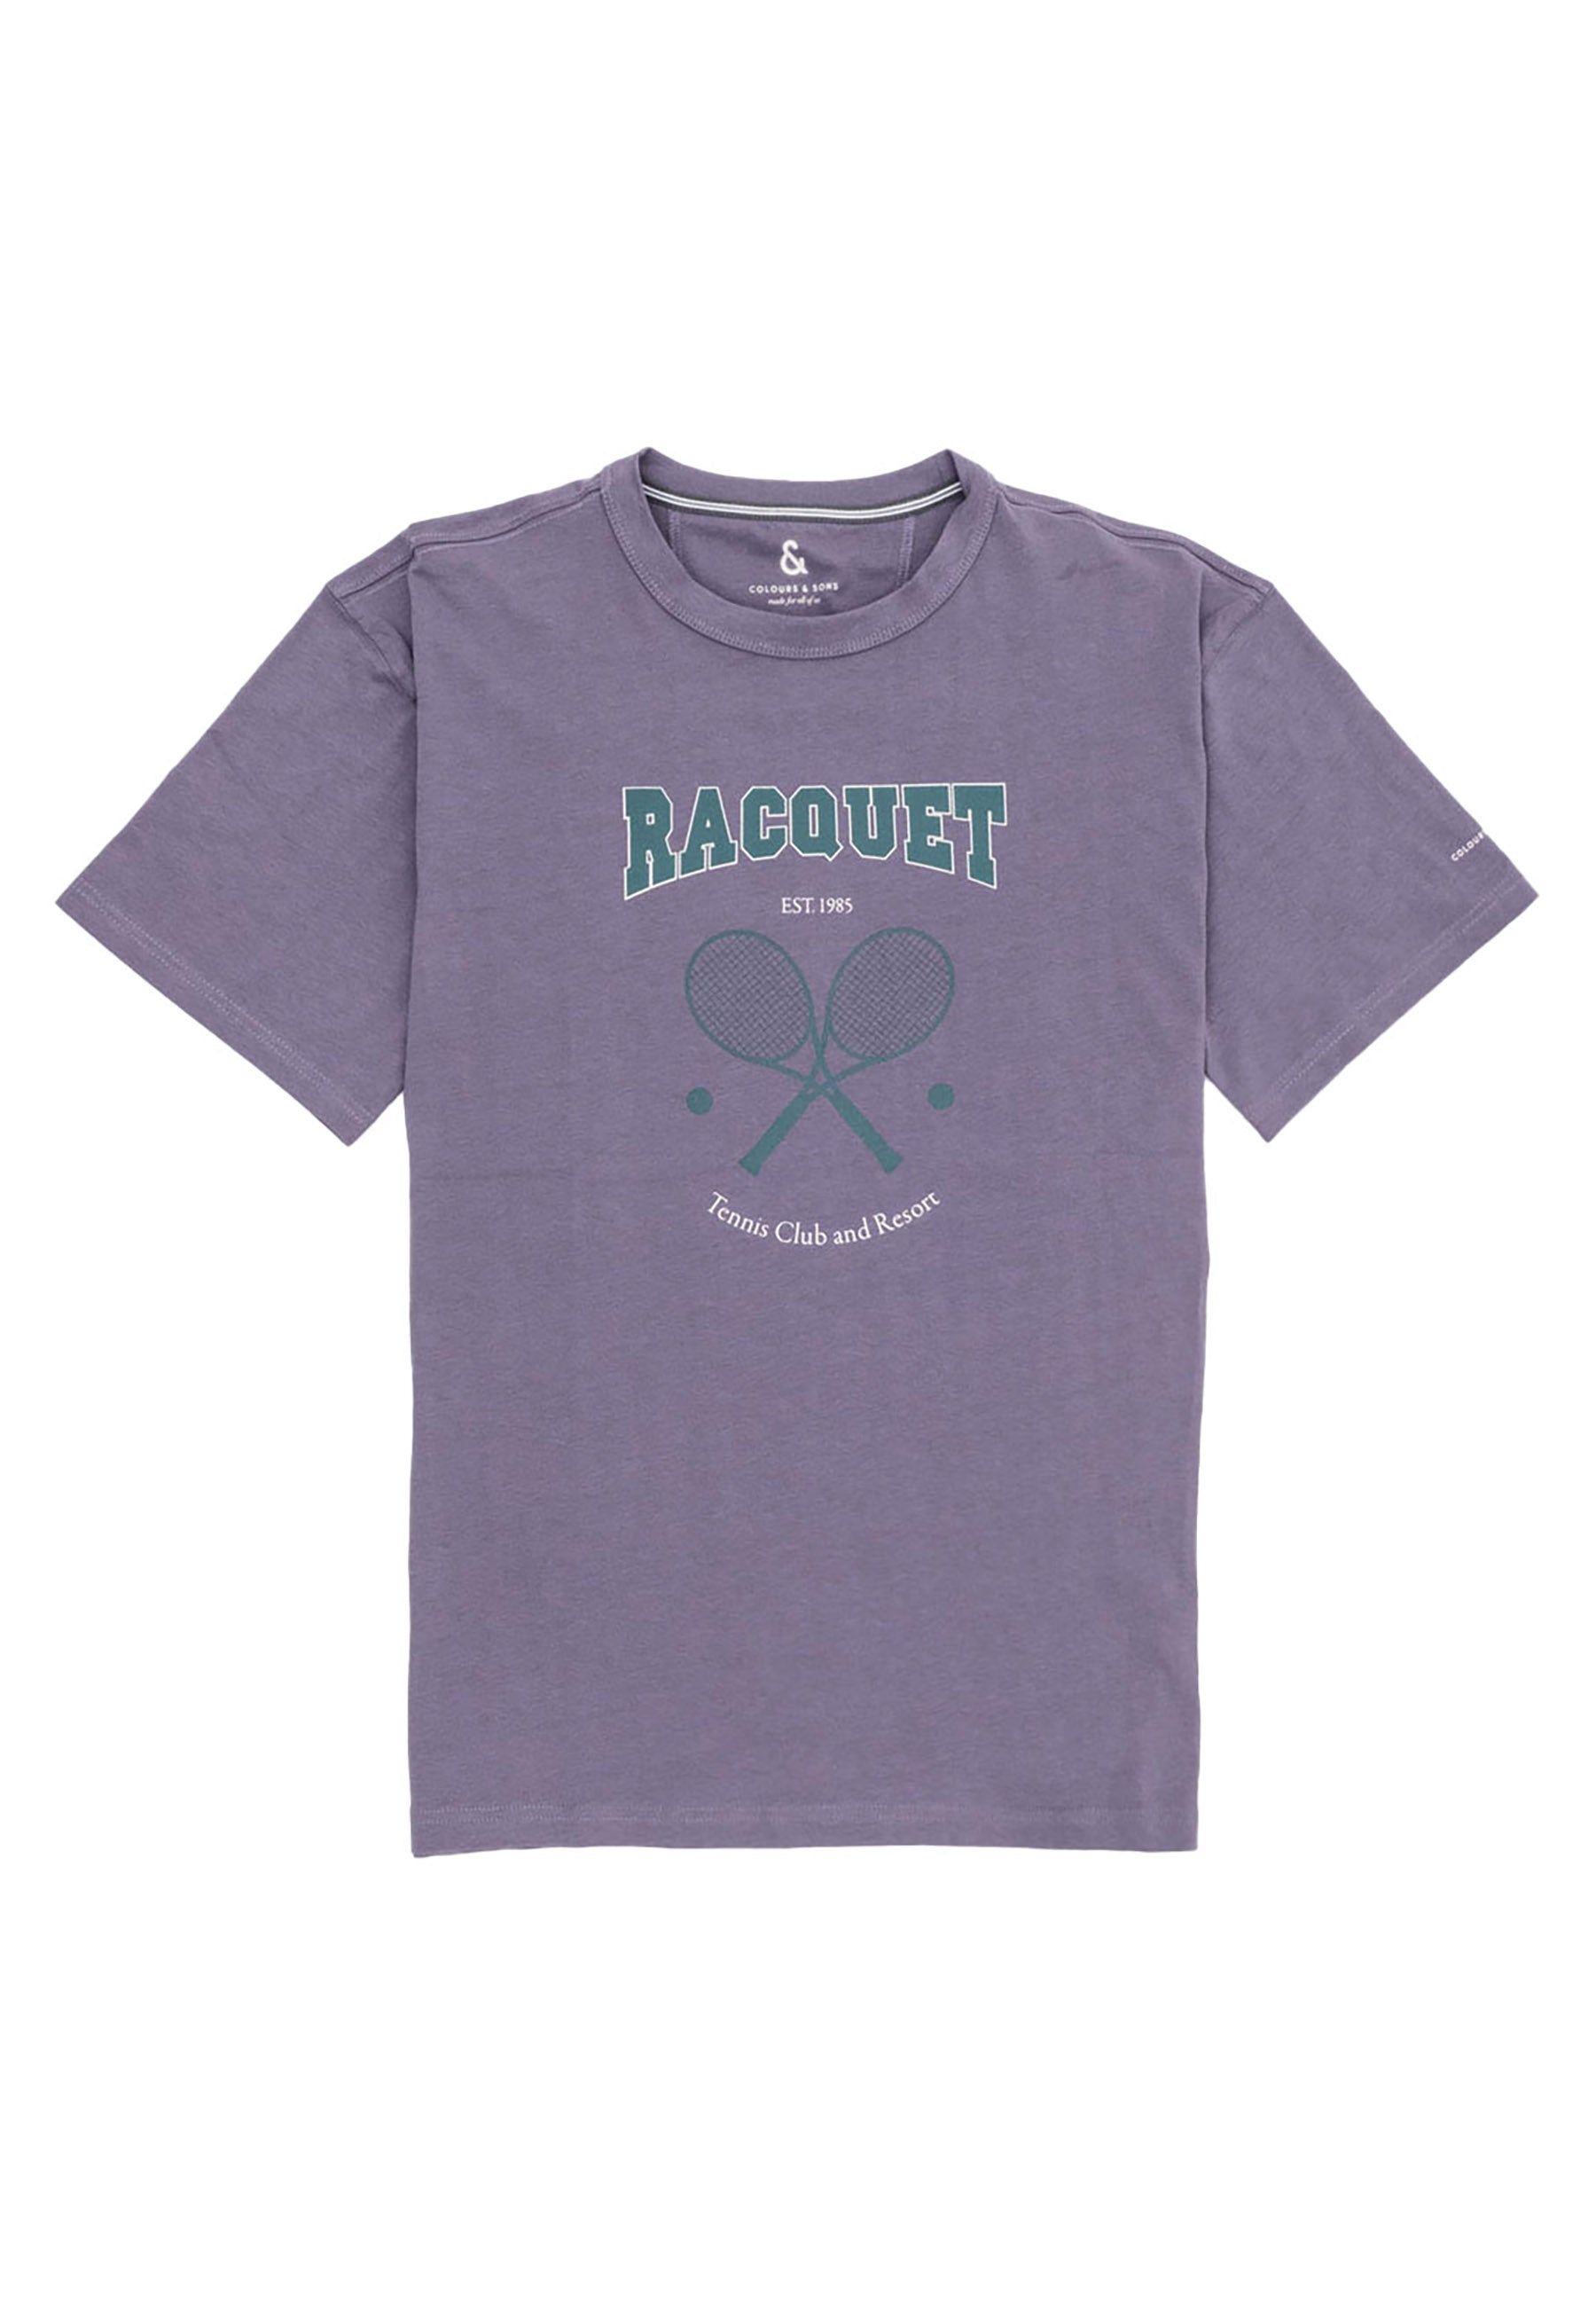 T-Shirt Printed in Racquet T-Shirts Colours and Sons   